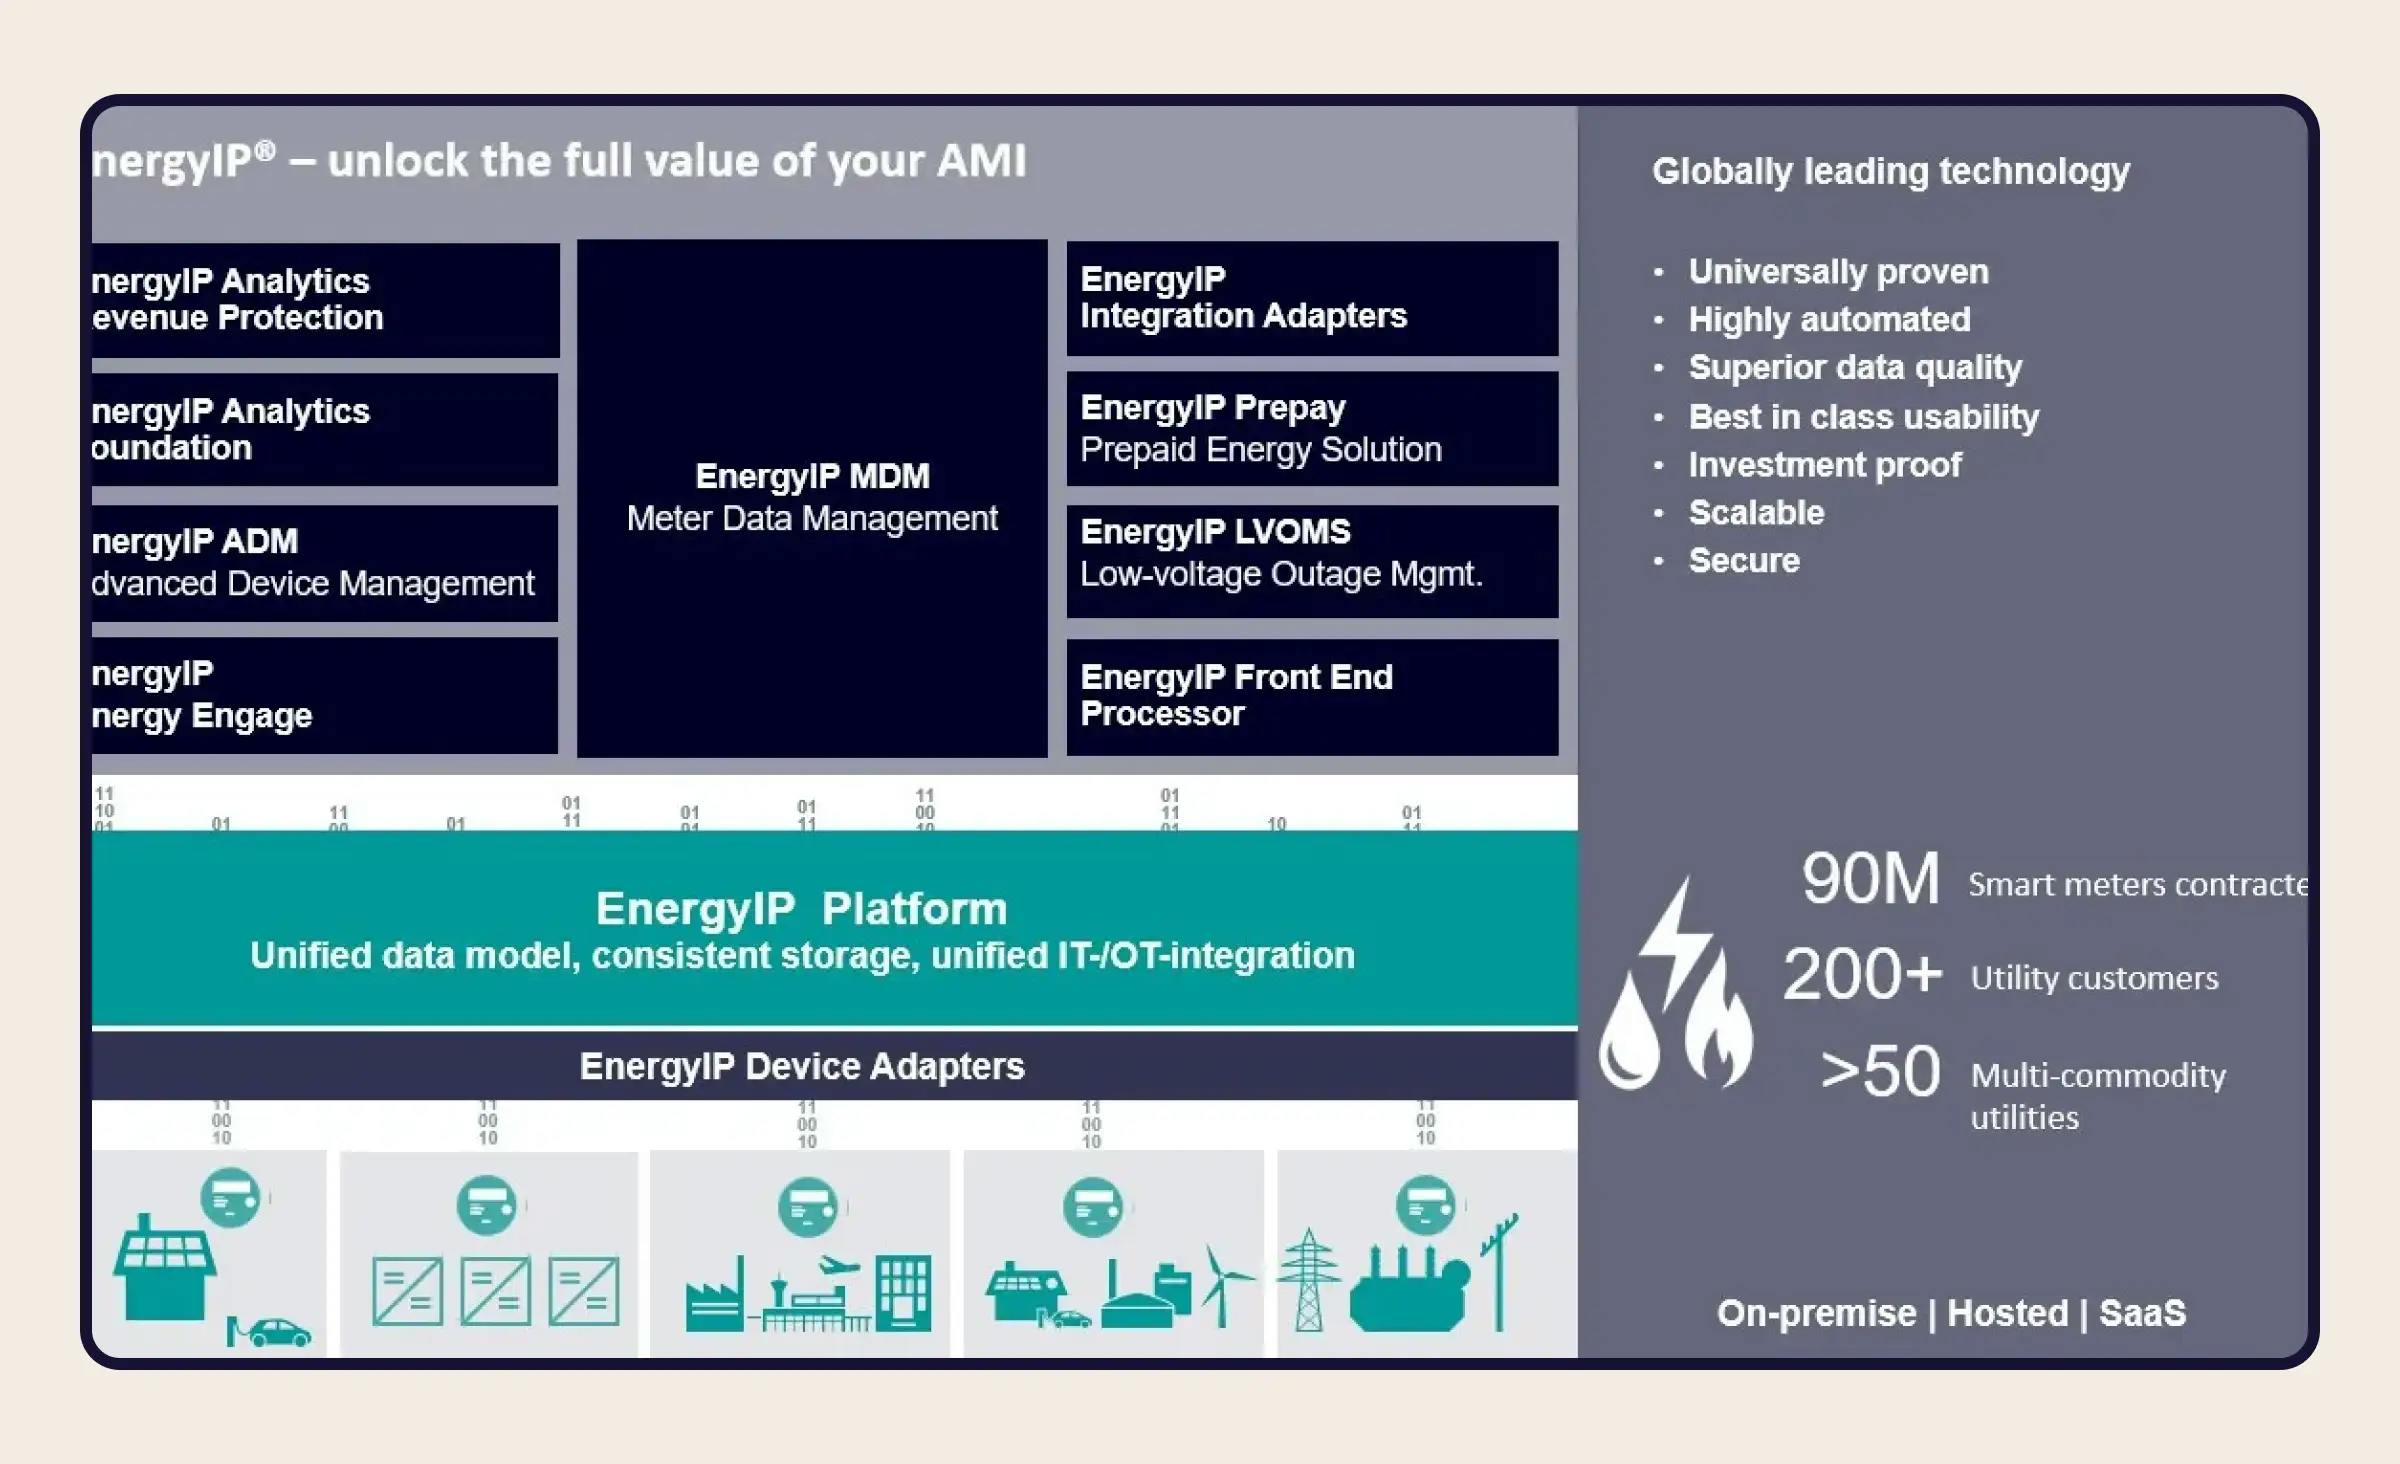 Siemens EnergyIP data analysis solutions for managing assets, predicting energy demands and optimizing operations.